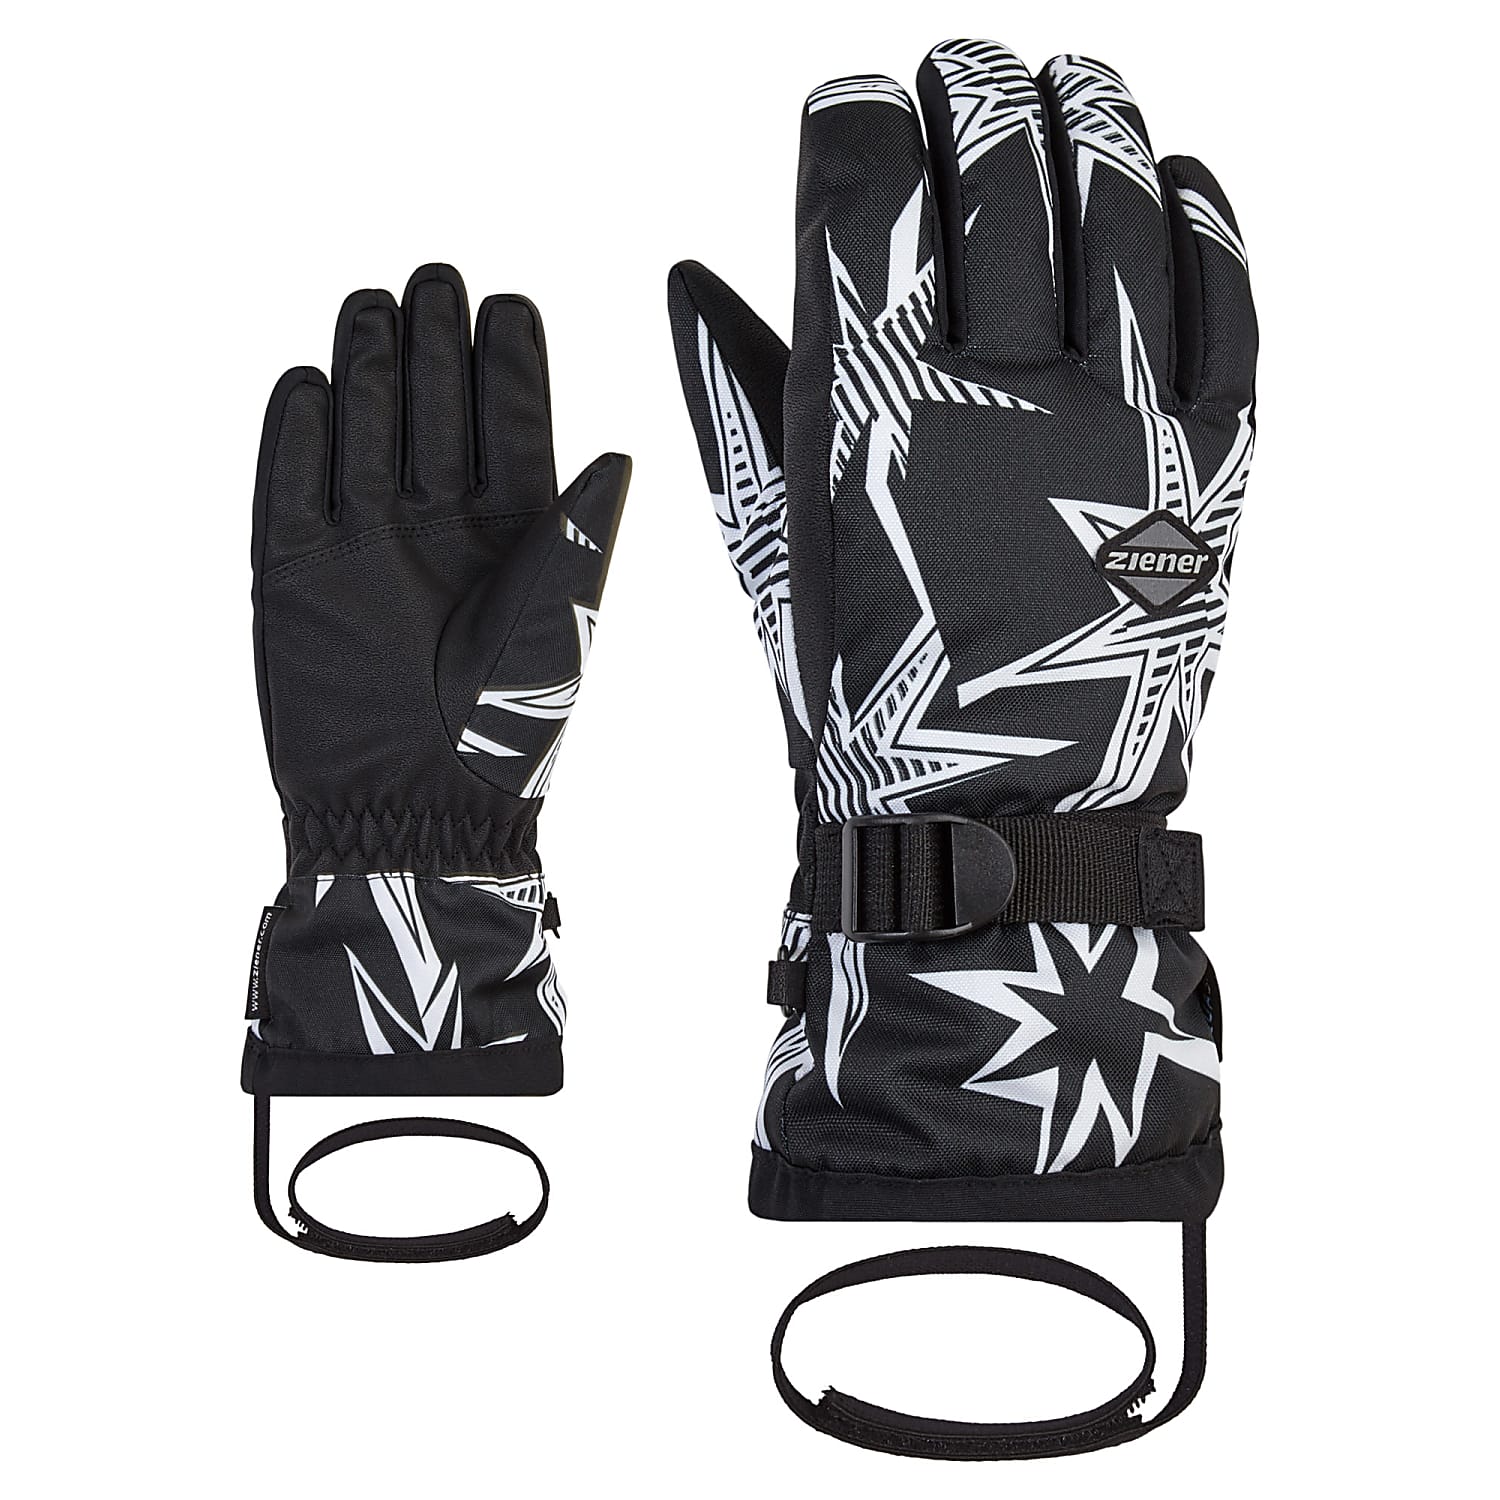 - GLOVE, AS LASSIM and Ziener JUNIOR Black Fast cheap shipping